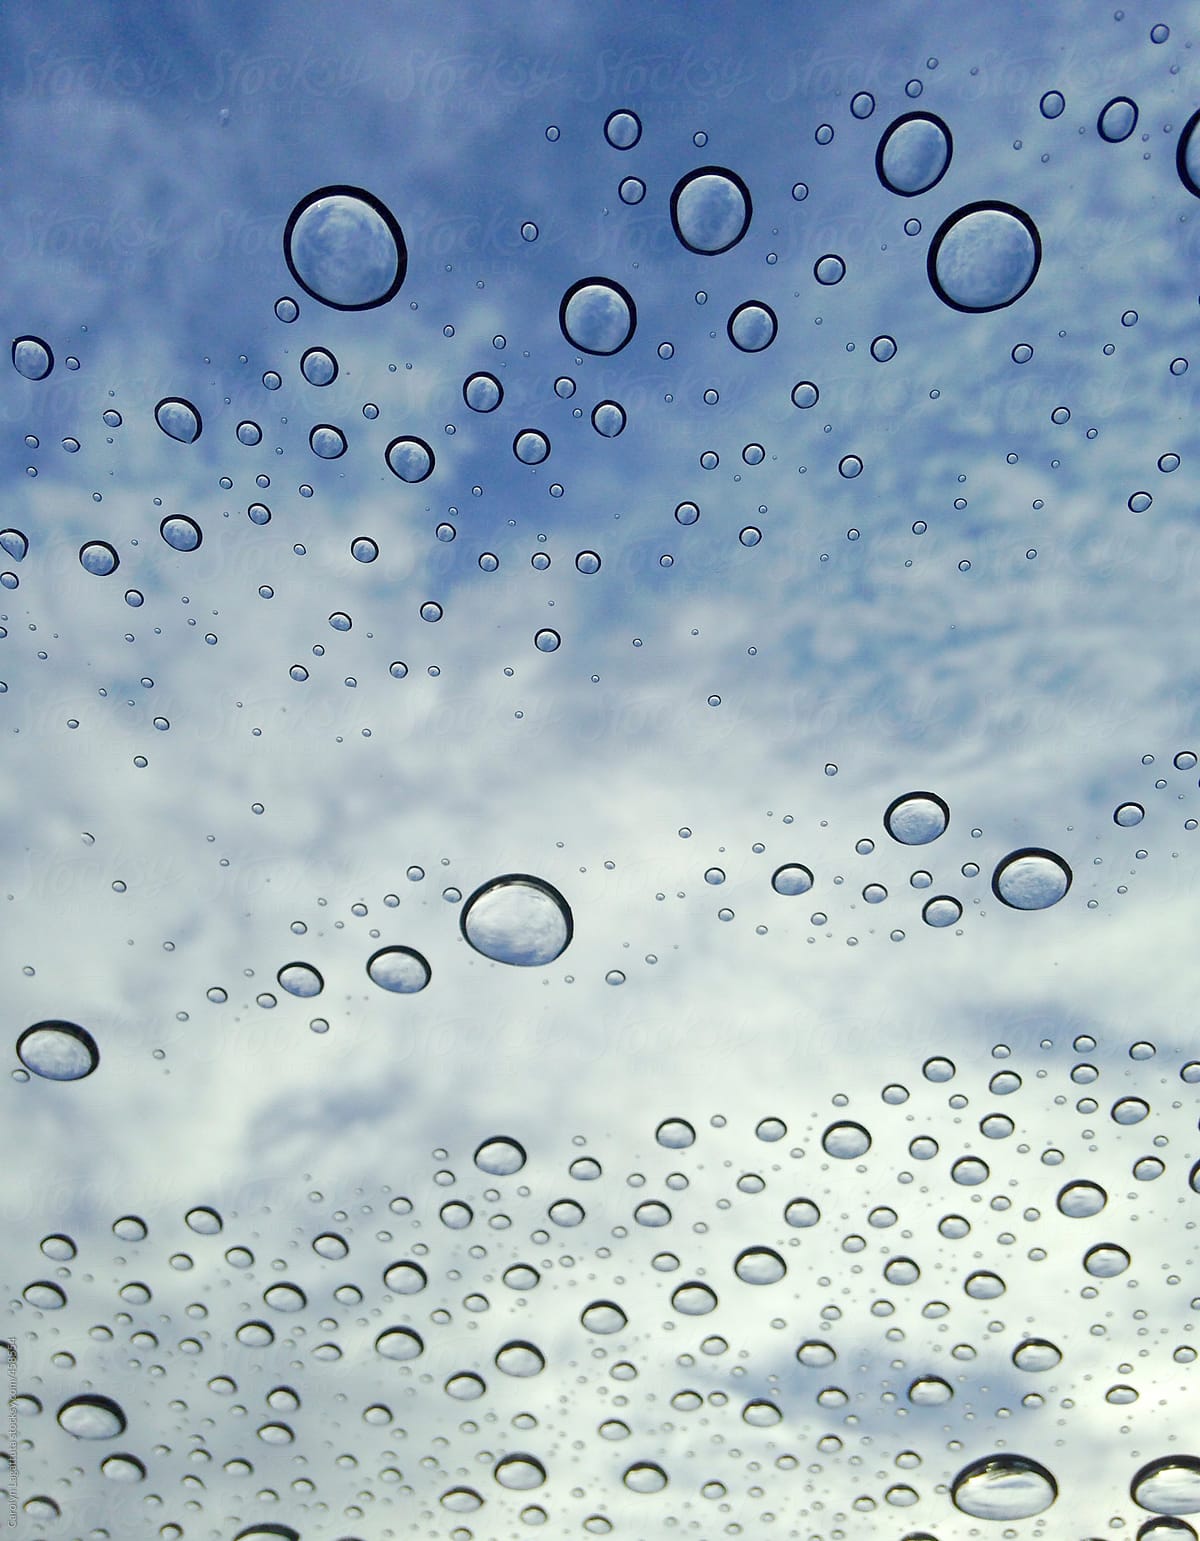 Rain stopped and sun is starting to come out - droplets against a blue sky